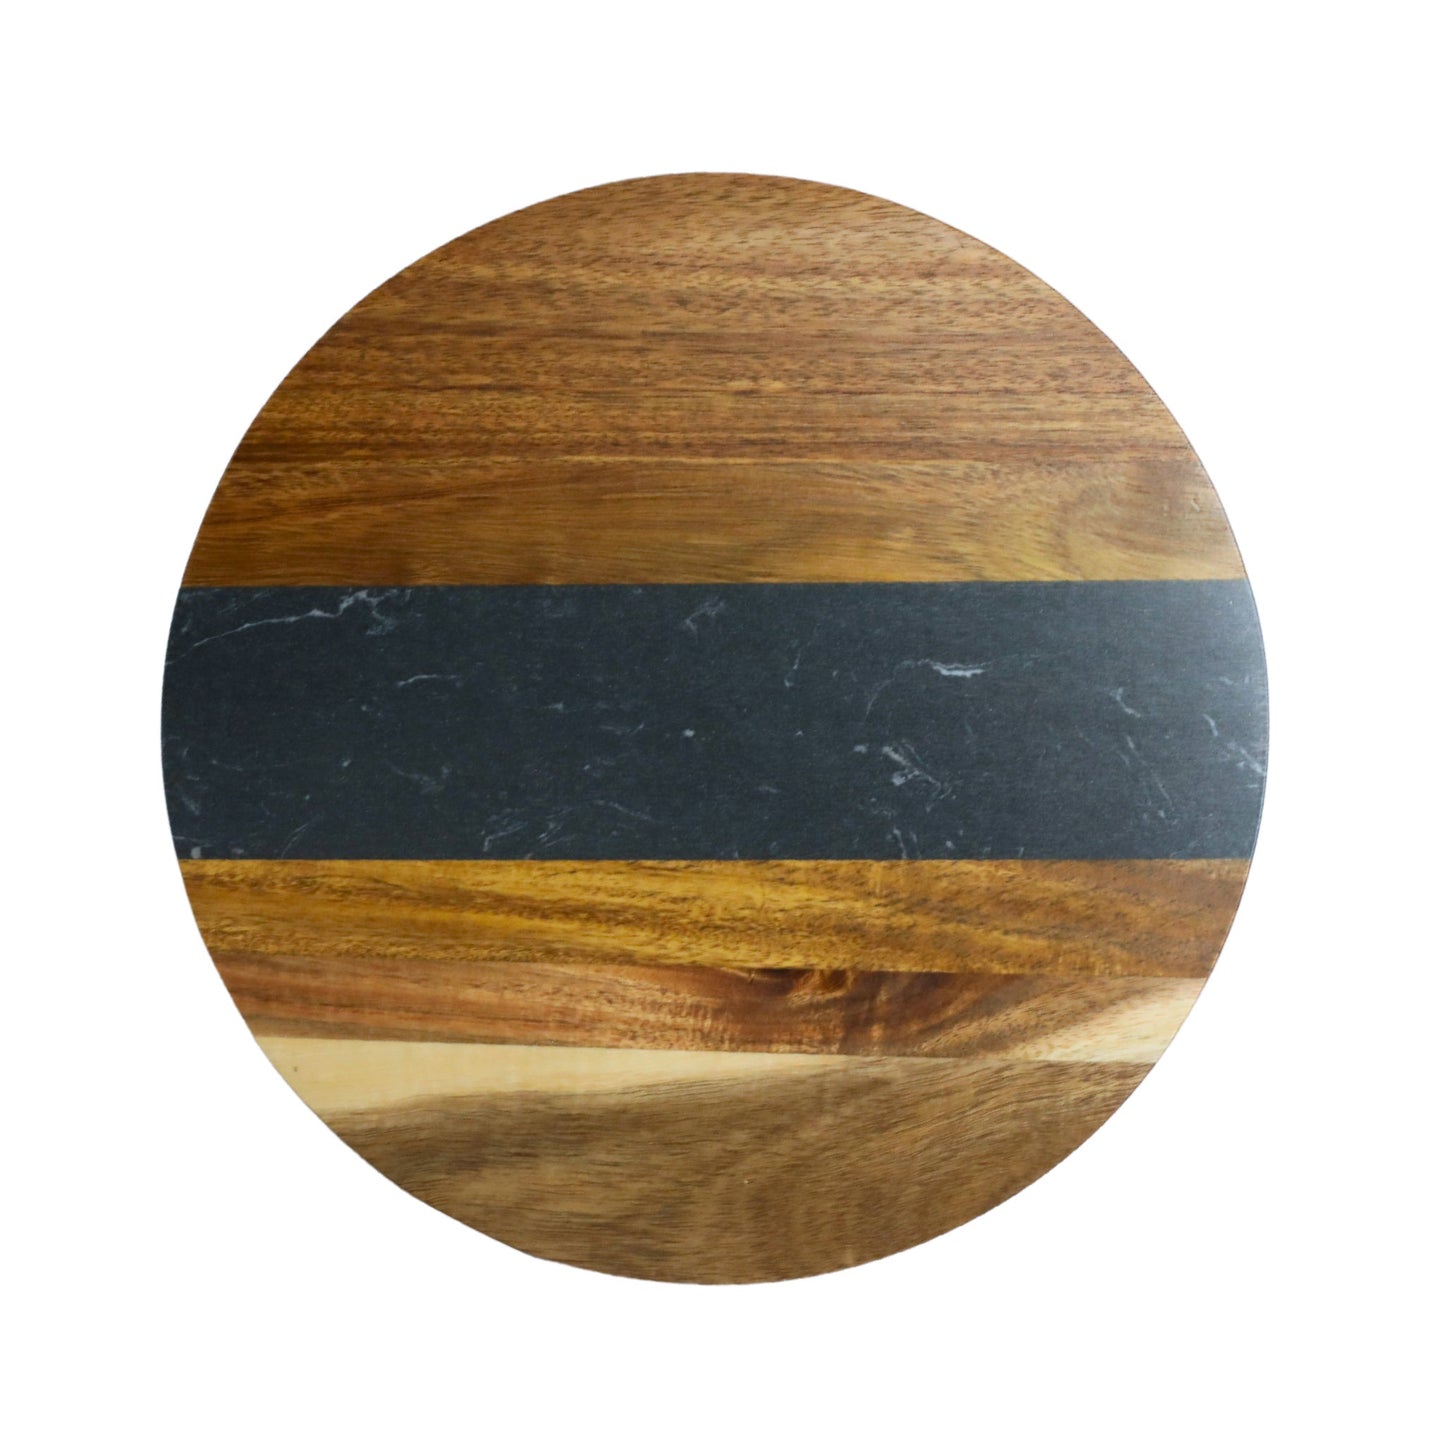 Black Marble and Acacia Wood Round Board - 11" by Creative Gifts